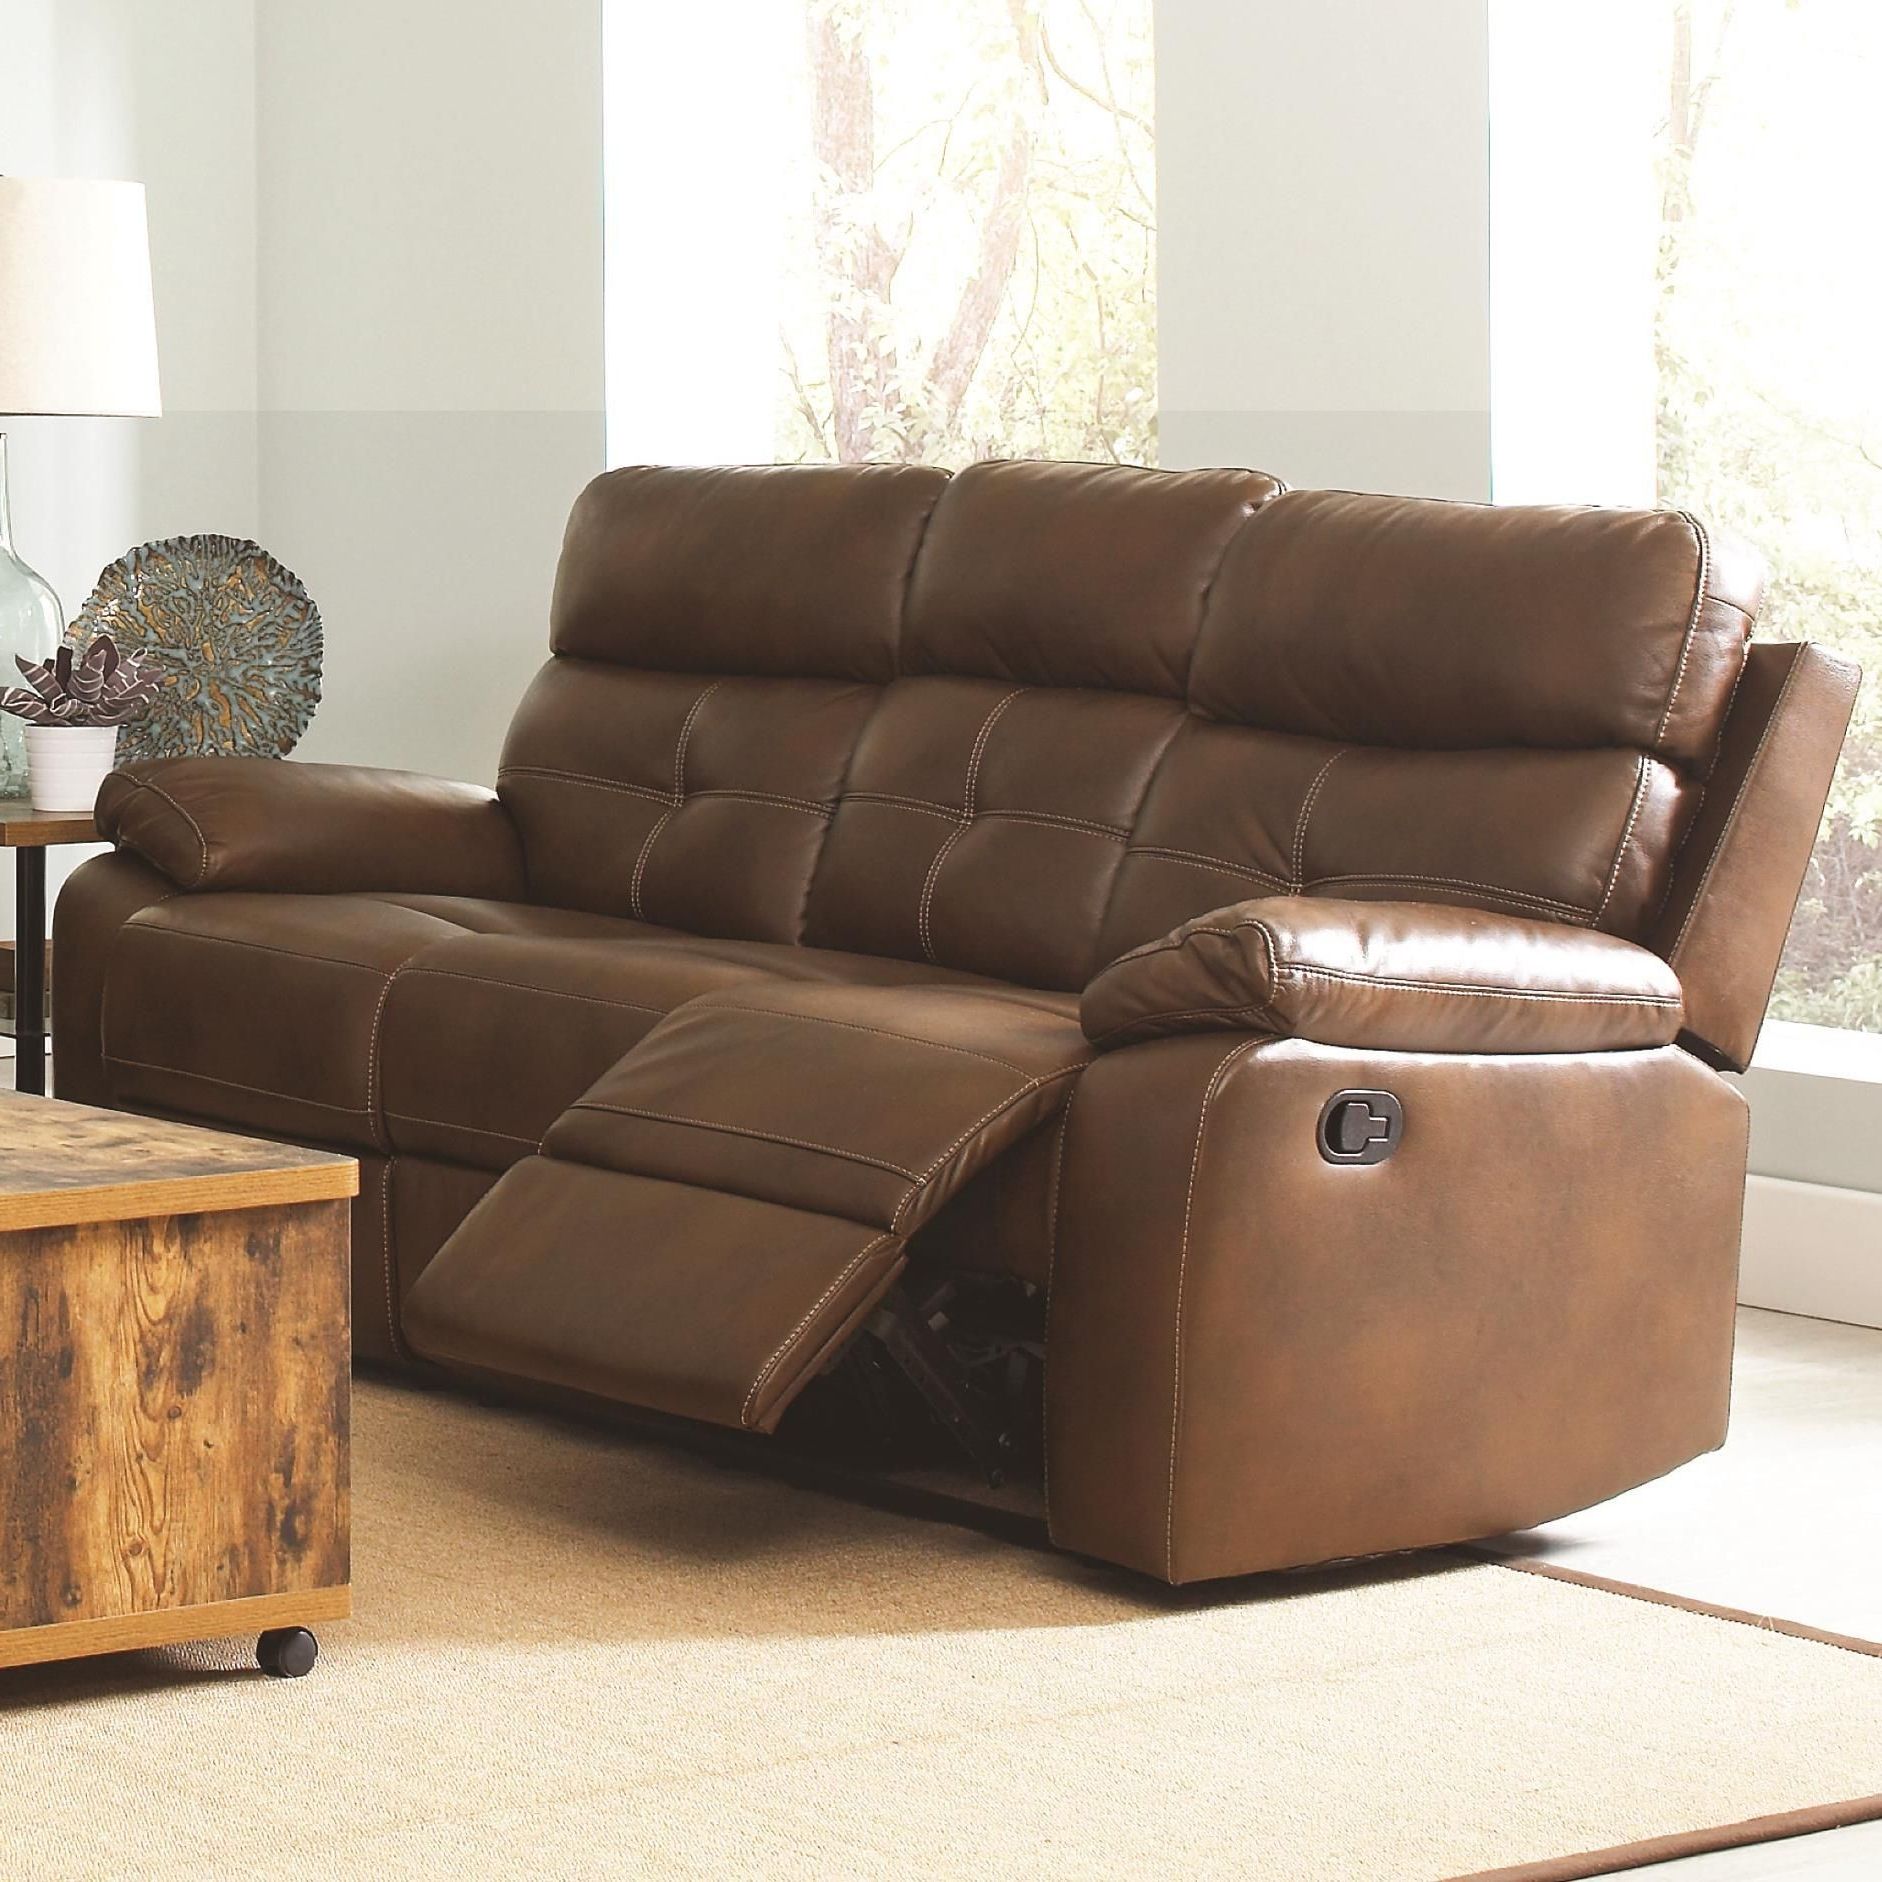 Widely Used Faux Leather Sofas In Damiano Faux Leather Reclining Sofa From Coaster (601691) (View 2 of 15)